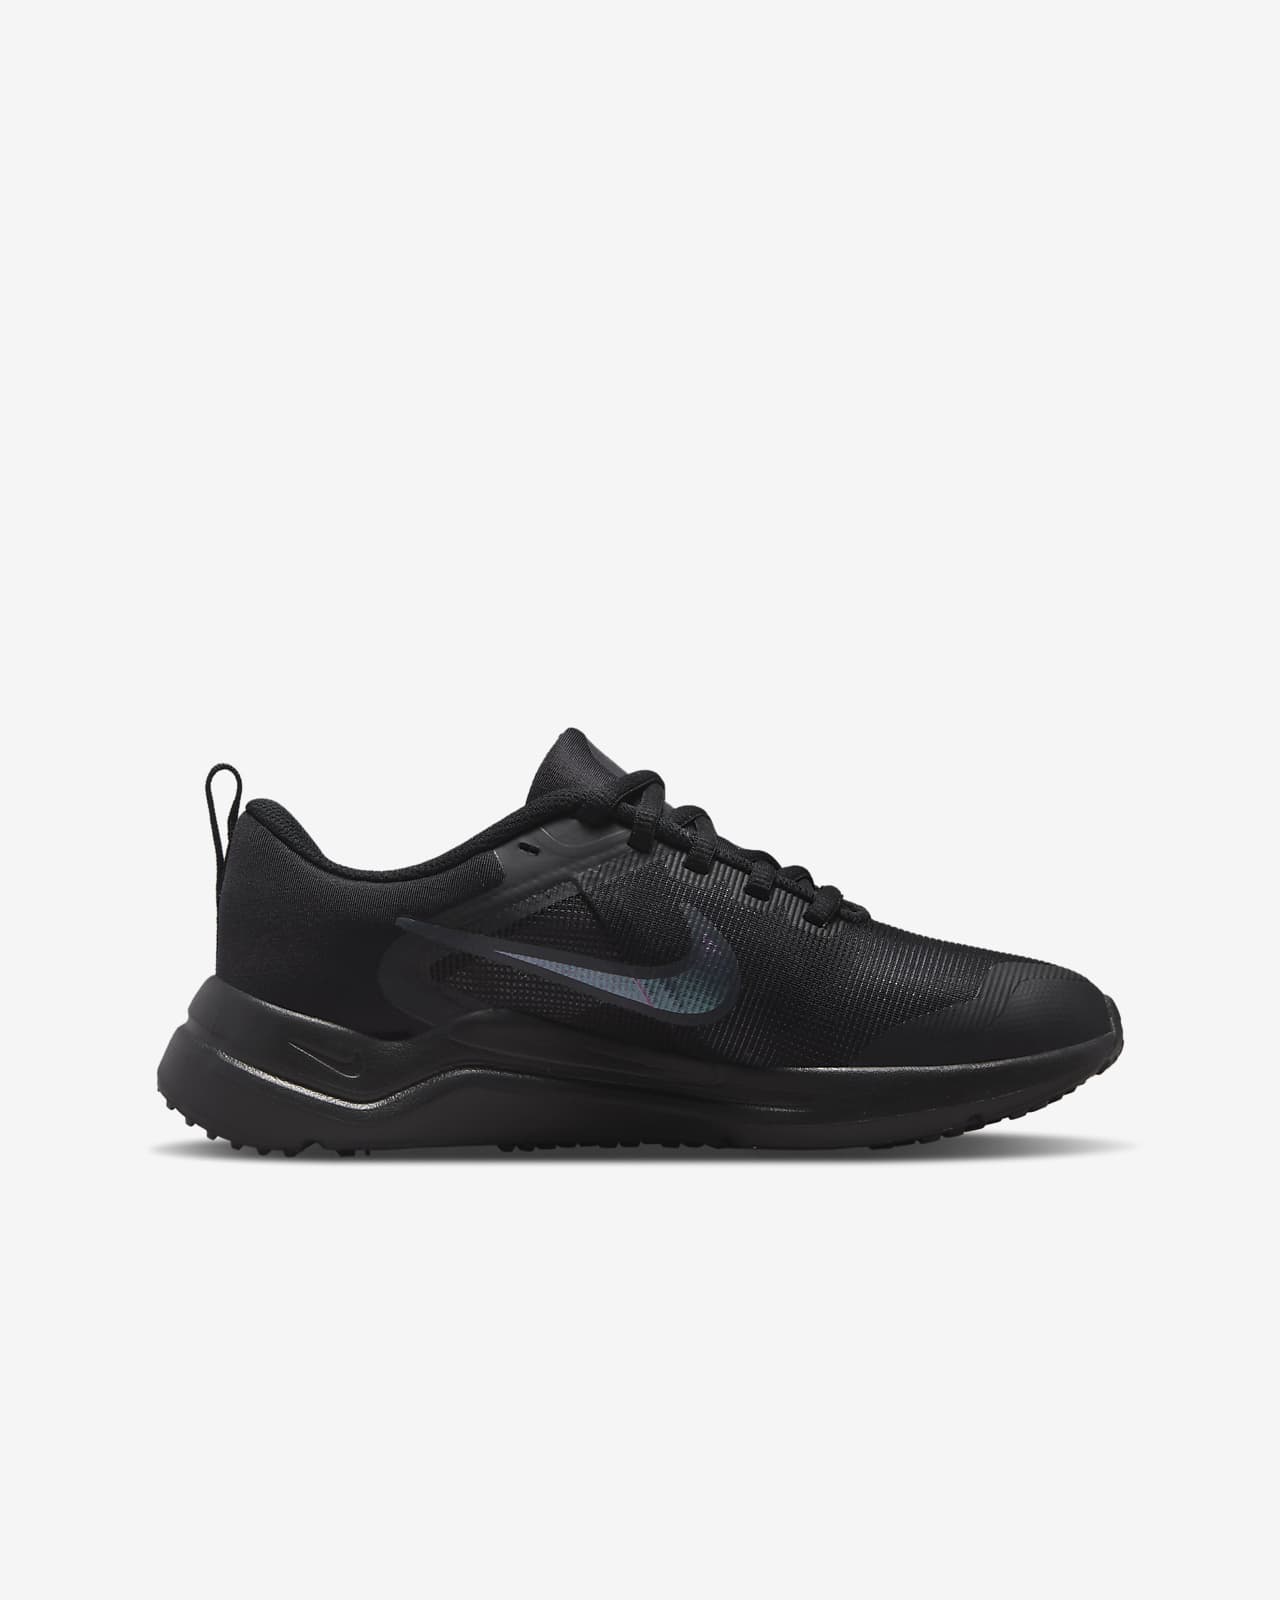 Nike Downshifter 12 Running Shoes | lupon.gov.ph